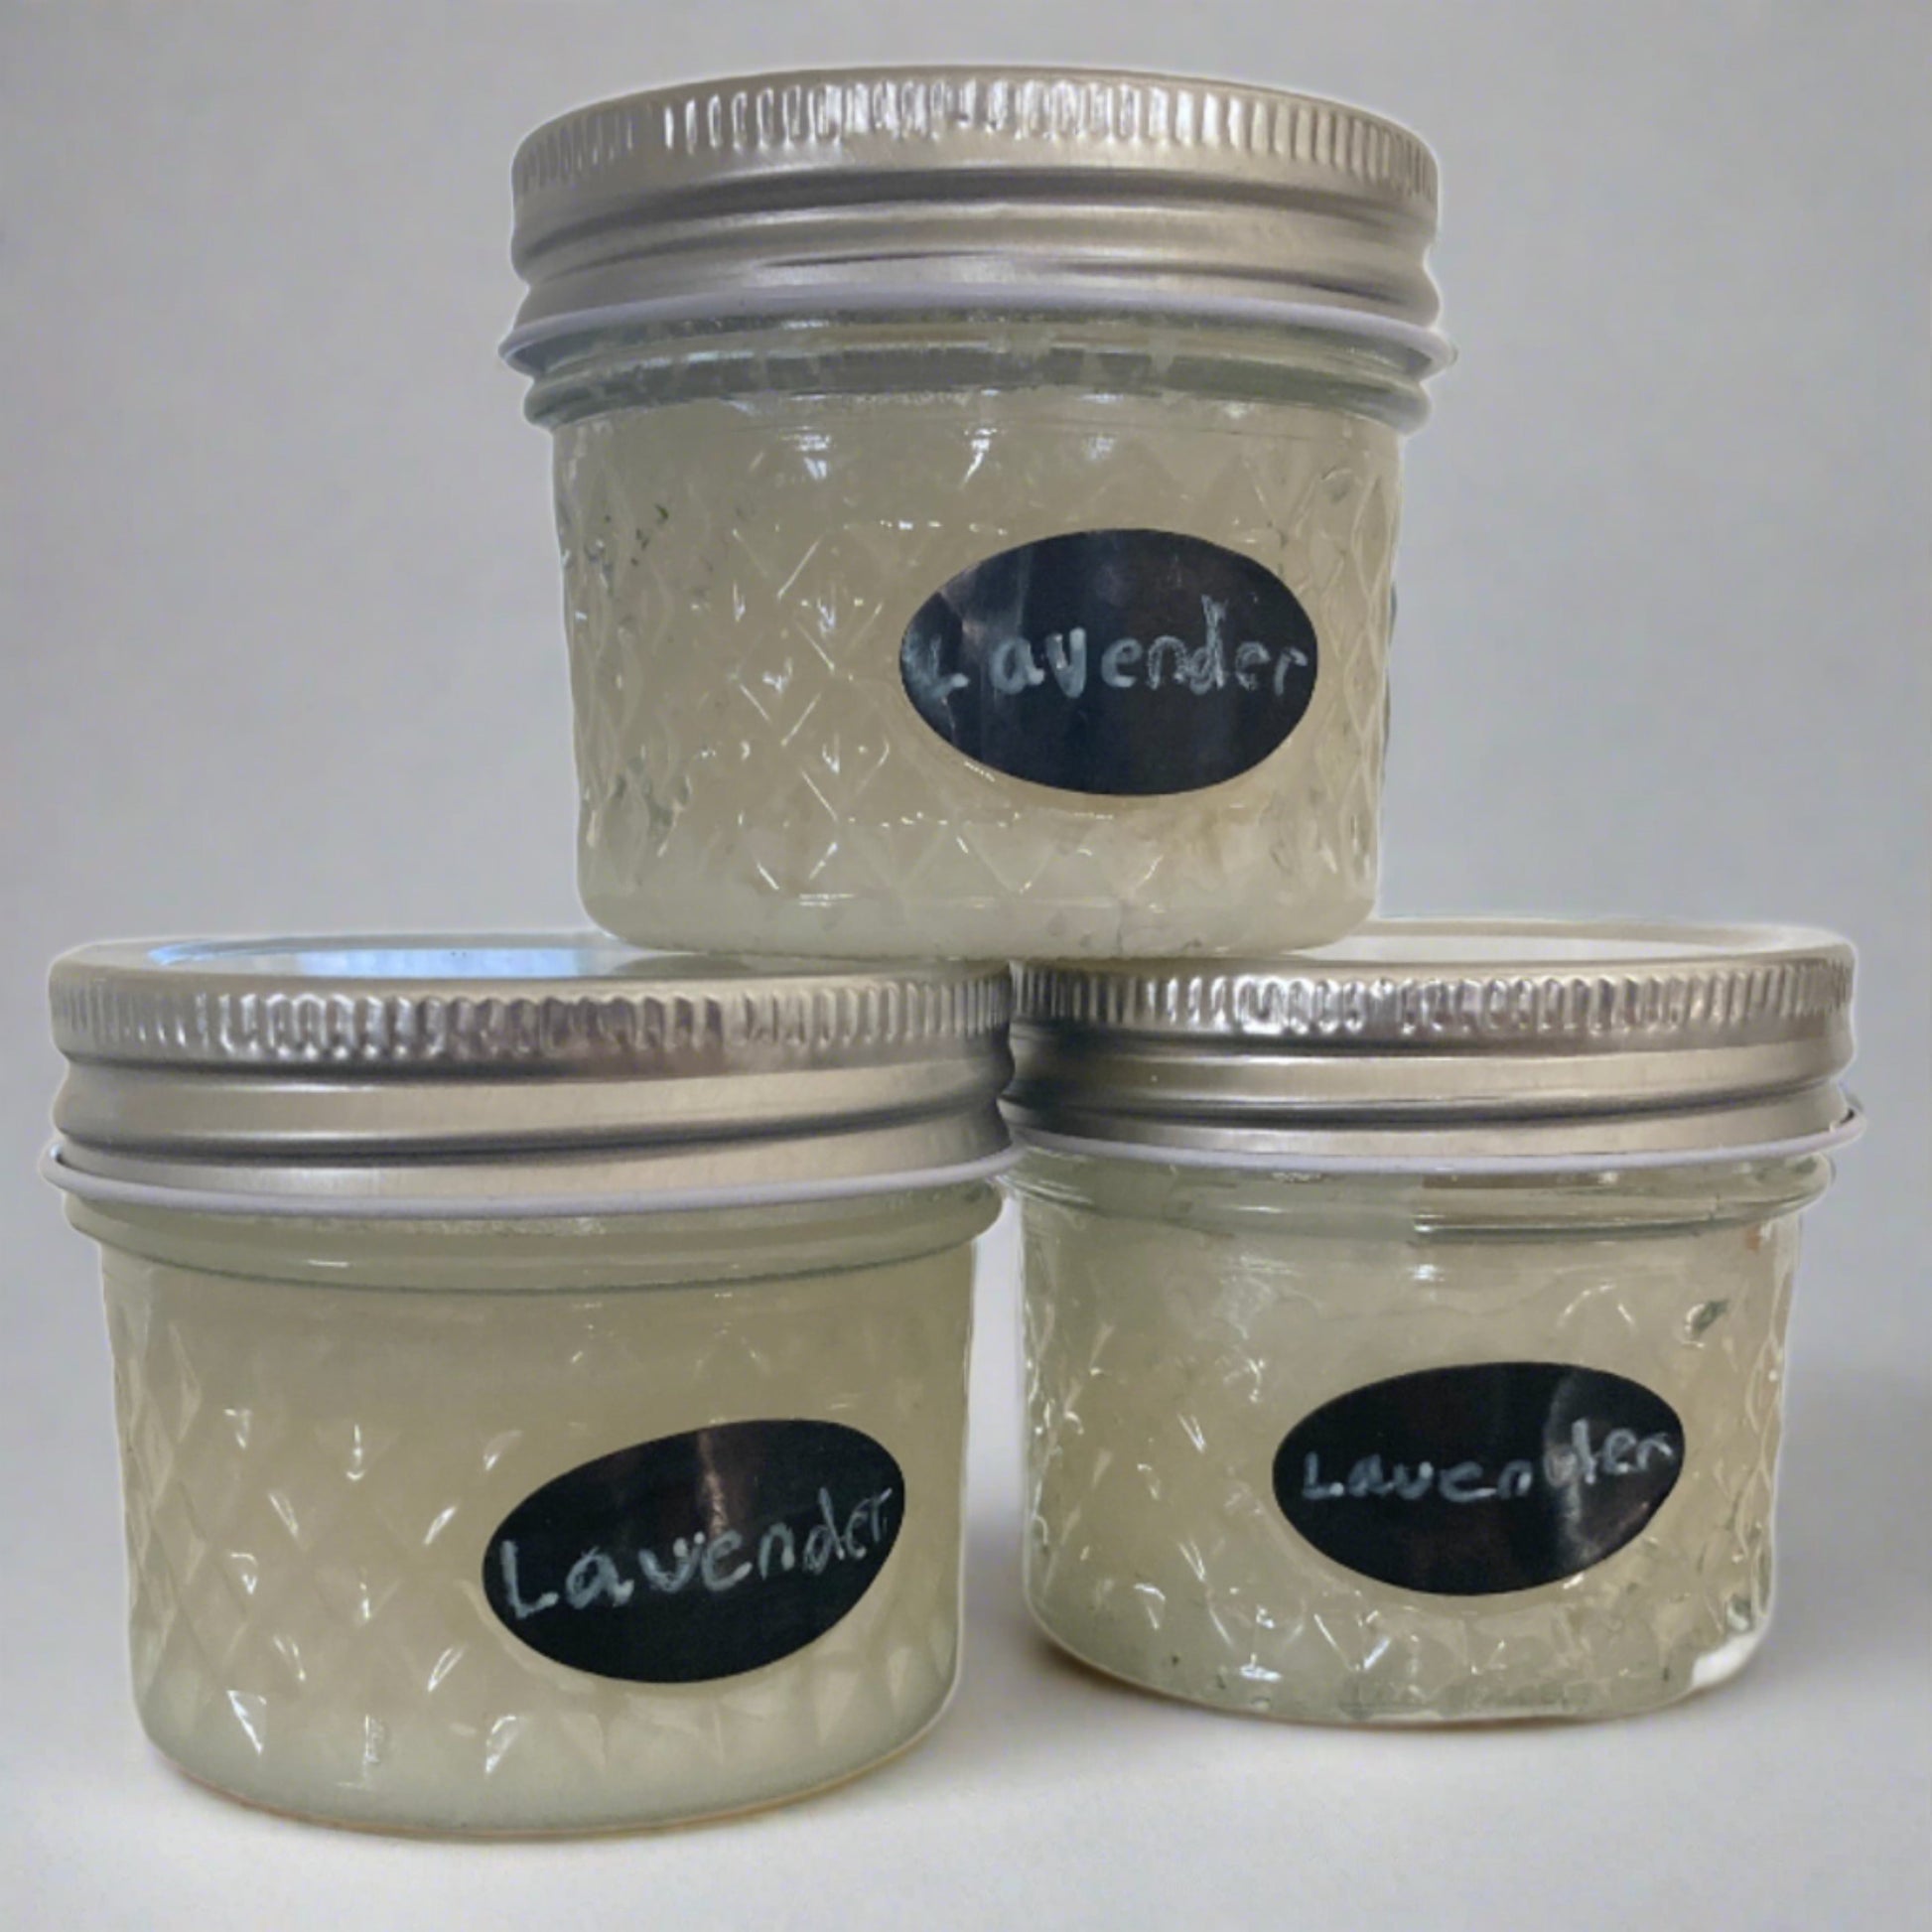 This photo is of three jars of sugar hand scrub stacked with two on the bottom and one on top. The scrub is scented in lavender and made with organic coconut oil, sugar, and essential oil.